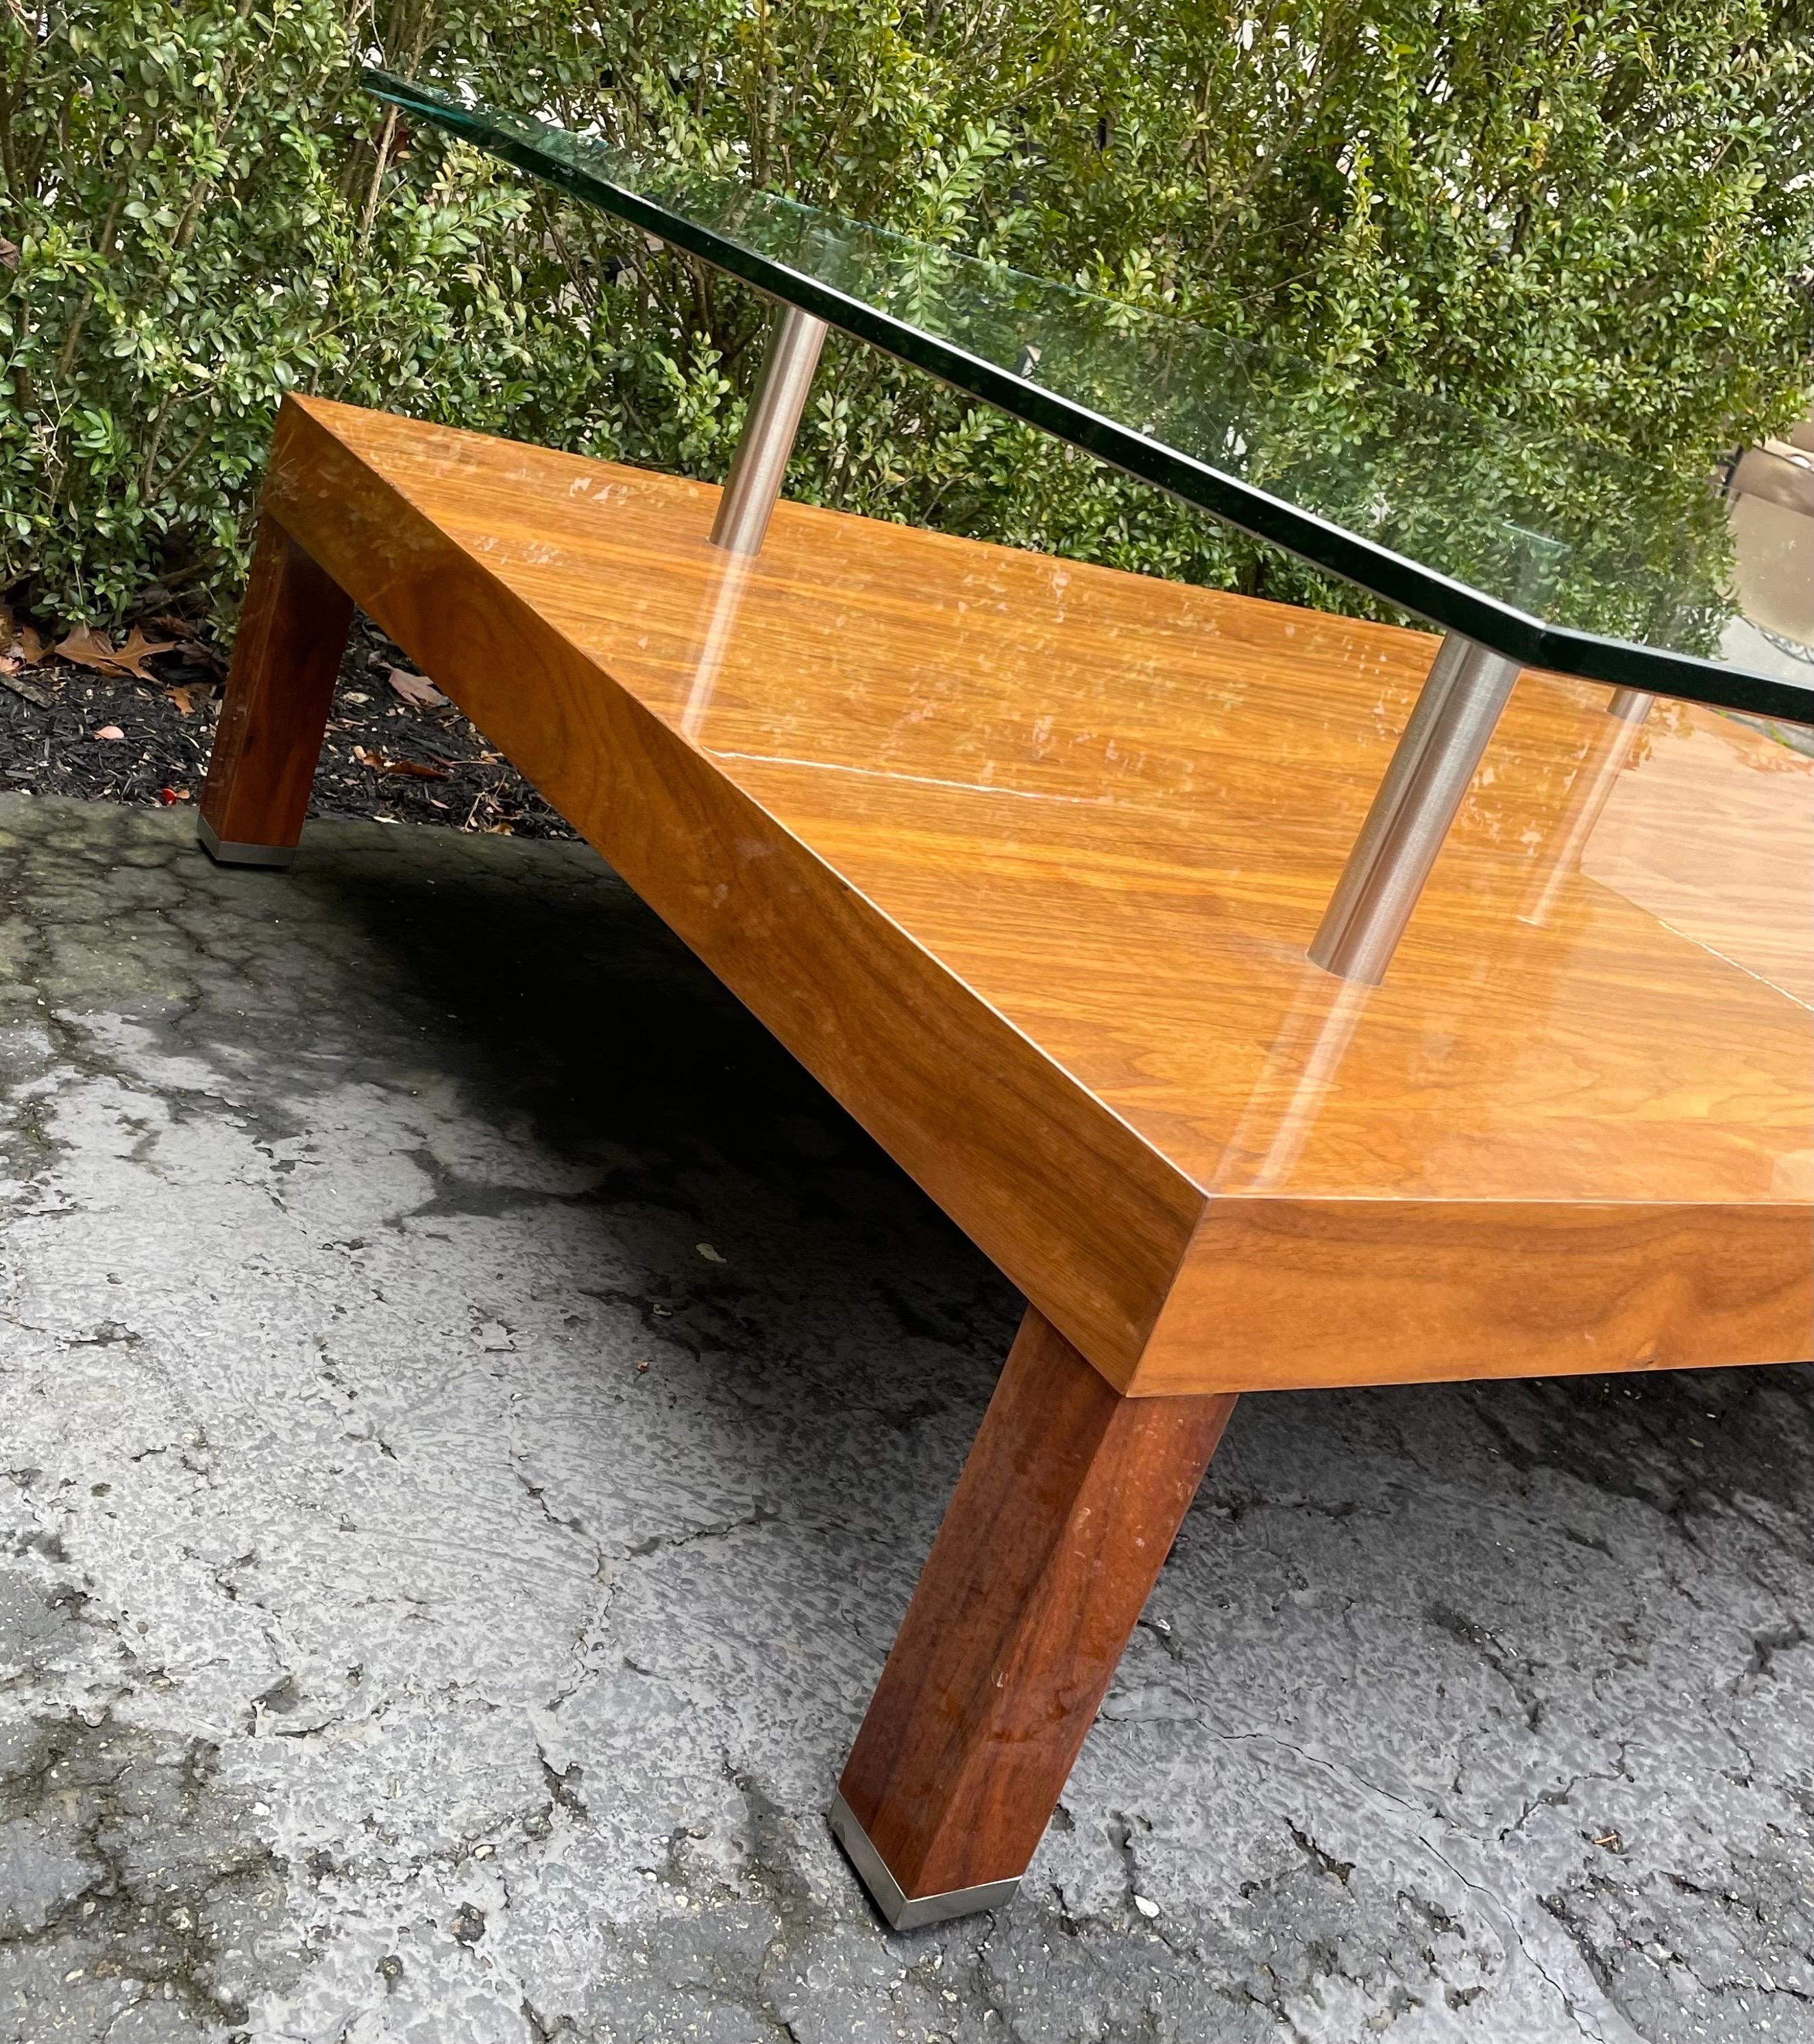 20th Century Coffee Table Two-Tiered Wood and Glass Rectangular In The Style of Karl Springer